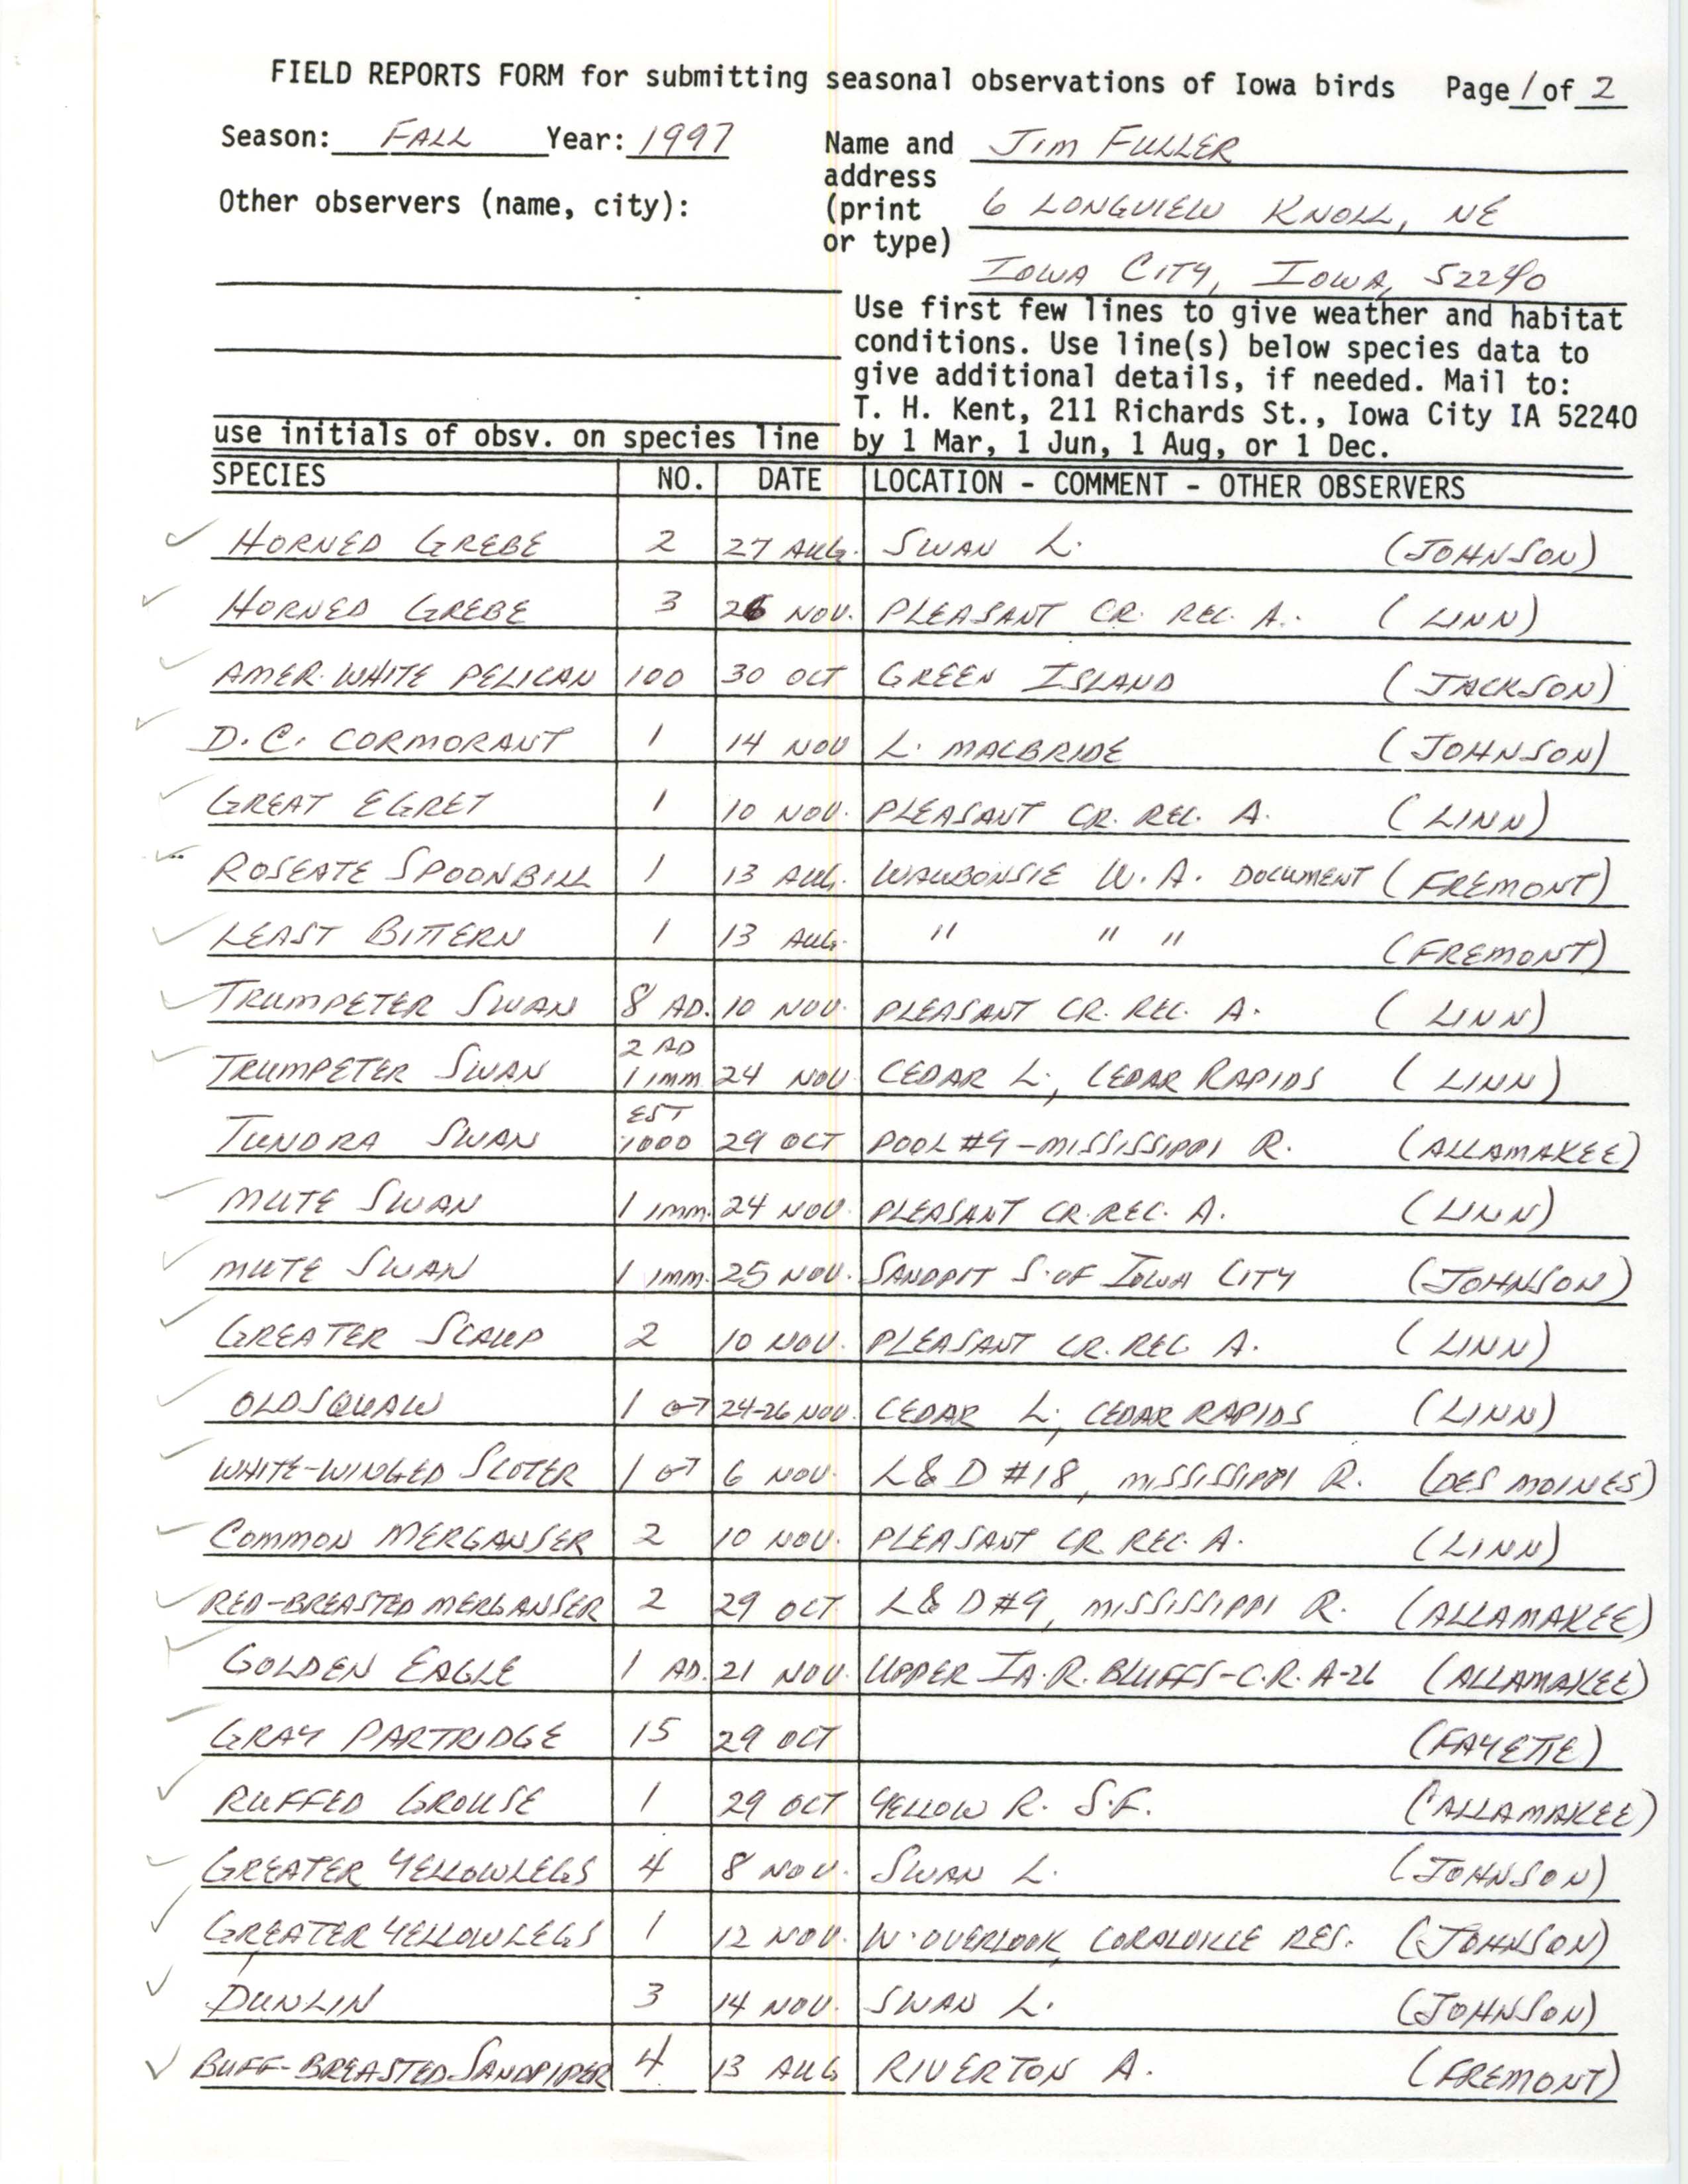 Field reports form for submitting seasonal observations of Iowa birds, James L. Fuller, fall 1997